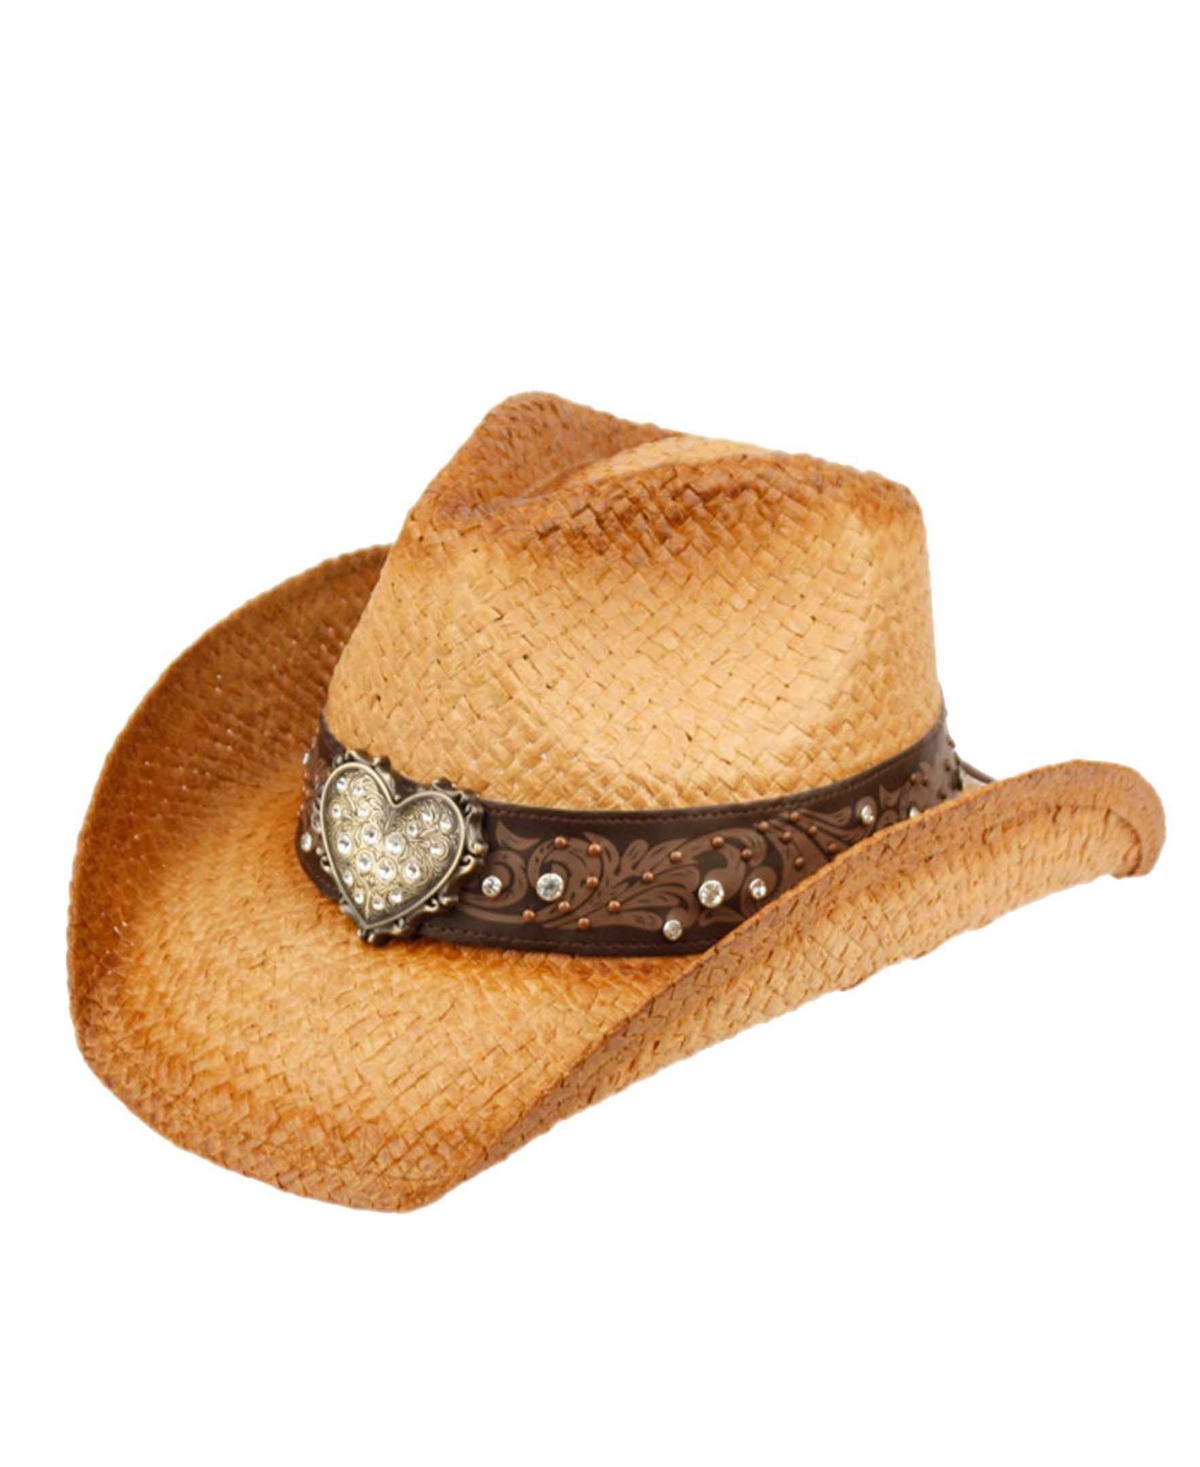 Cowboy Hat with Trim Band and Studs - Natural